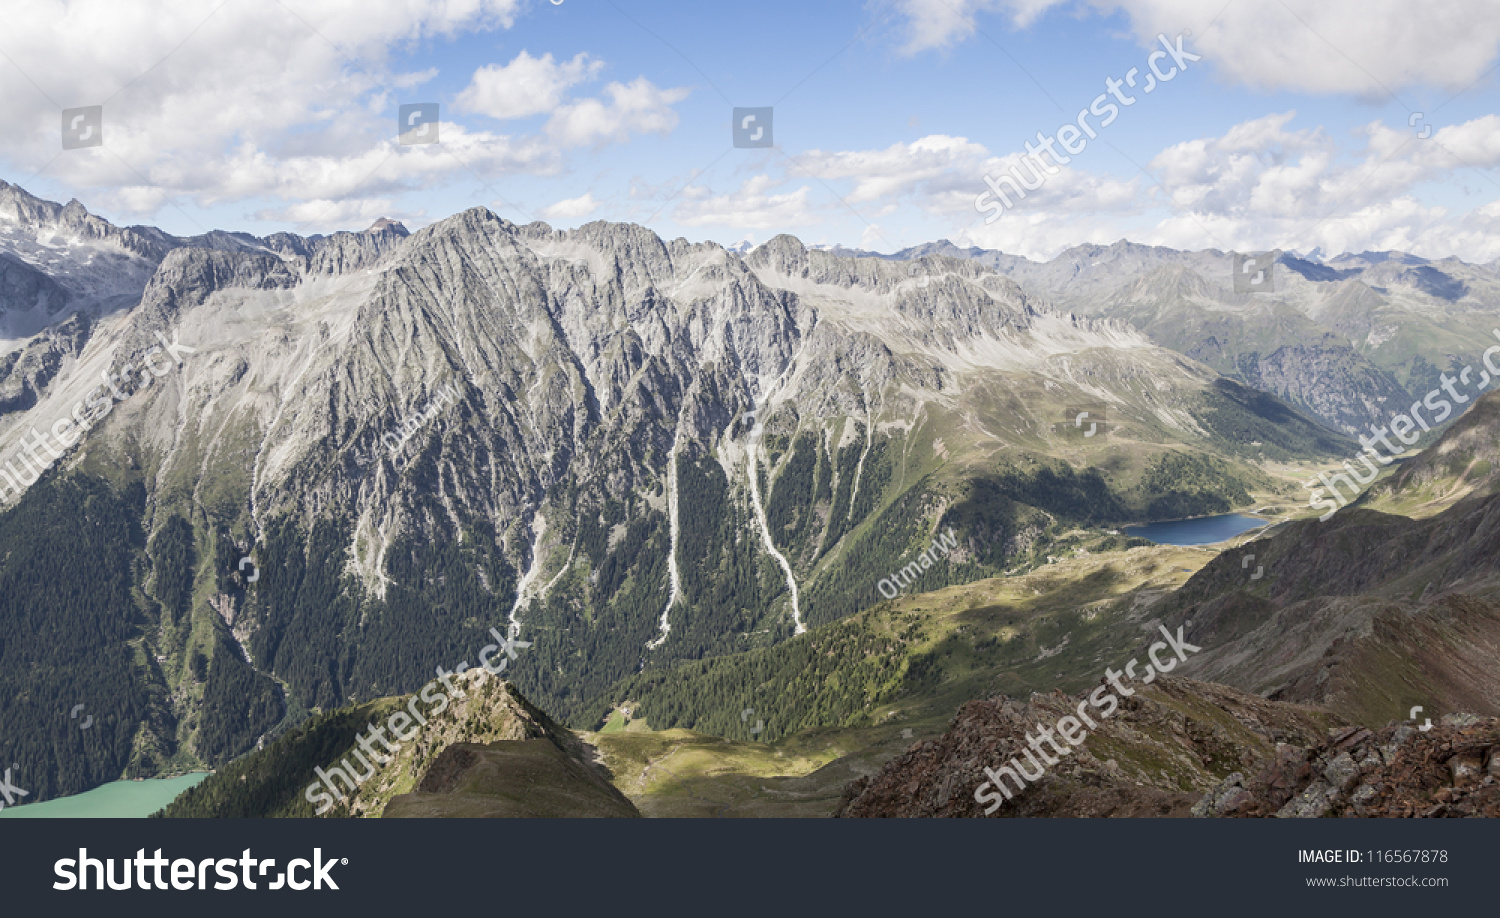 View of beautiful alpine mountain range  with high peaks, valley and lakes at the border of Austria/Italy. #116567878